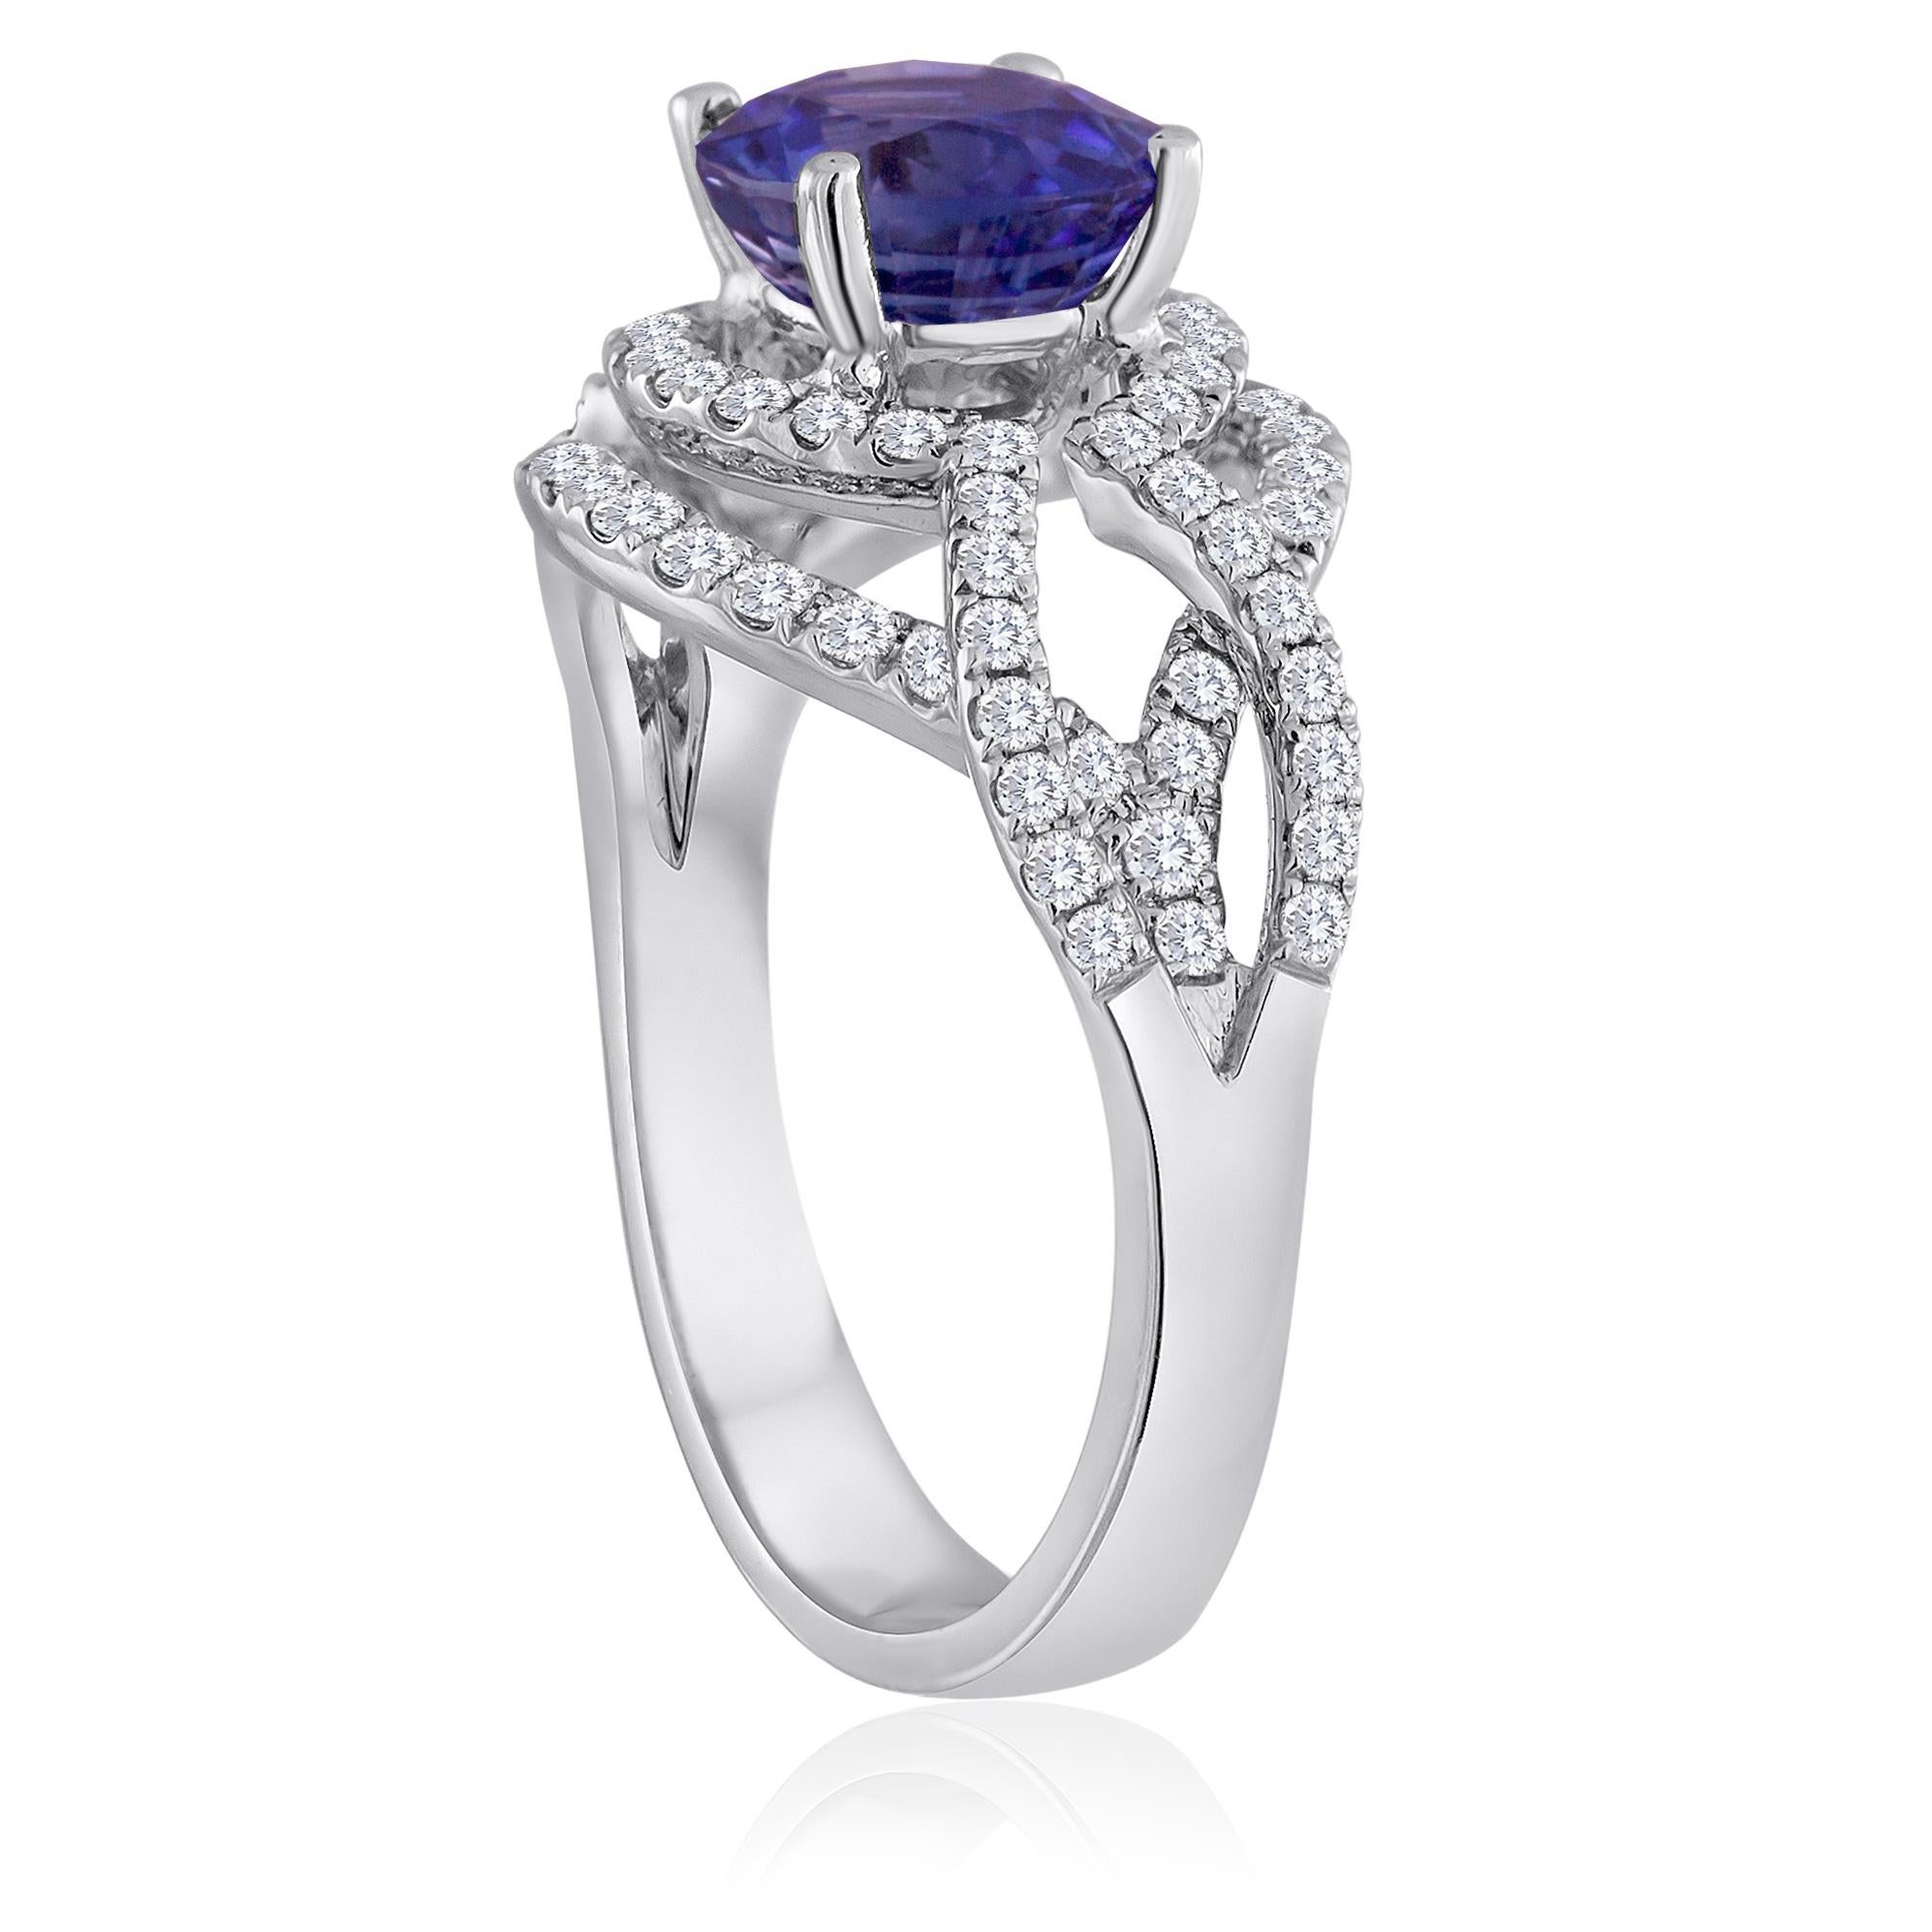 Beautiful Double Halo Ring.
The ring is 18K White Gold.
The center stone is a round 2.01 Carat Blue Sapphire.
The Sapphire is heated and is certified by LAPIS.
There are 0.84 carats in diamonds F/G VS.
The ring is a size 6.5, sizable.
The ring